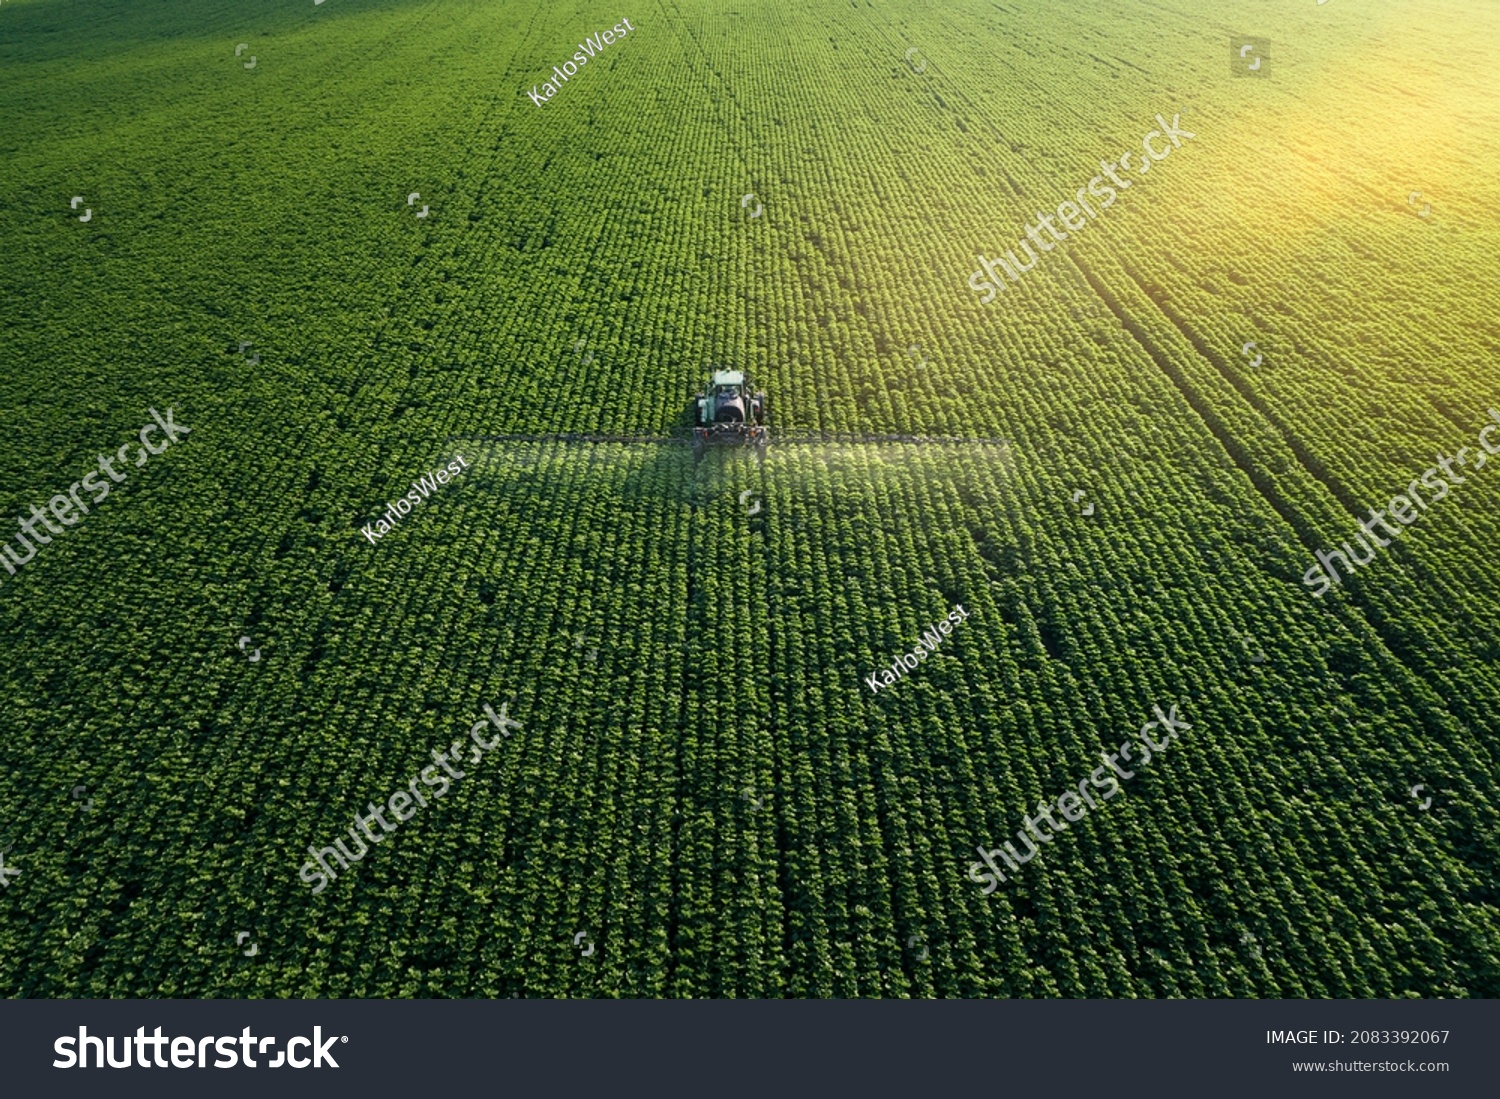 Taking care of the Crop. Aerial view of a Tractor fertilizing a cultivated agricultural field. Stock-foto